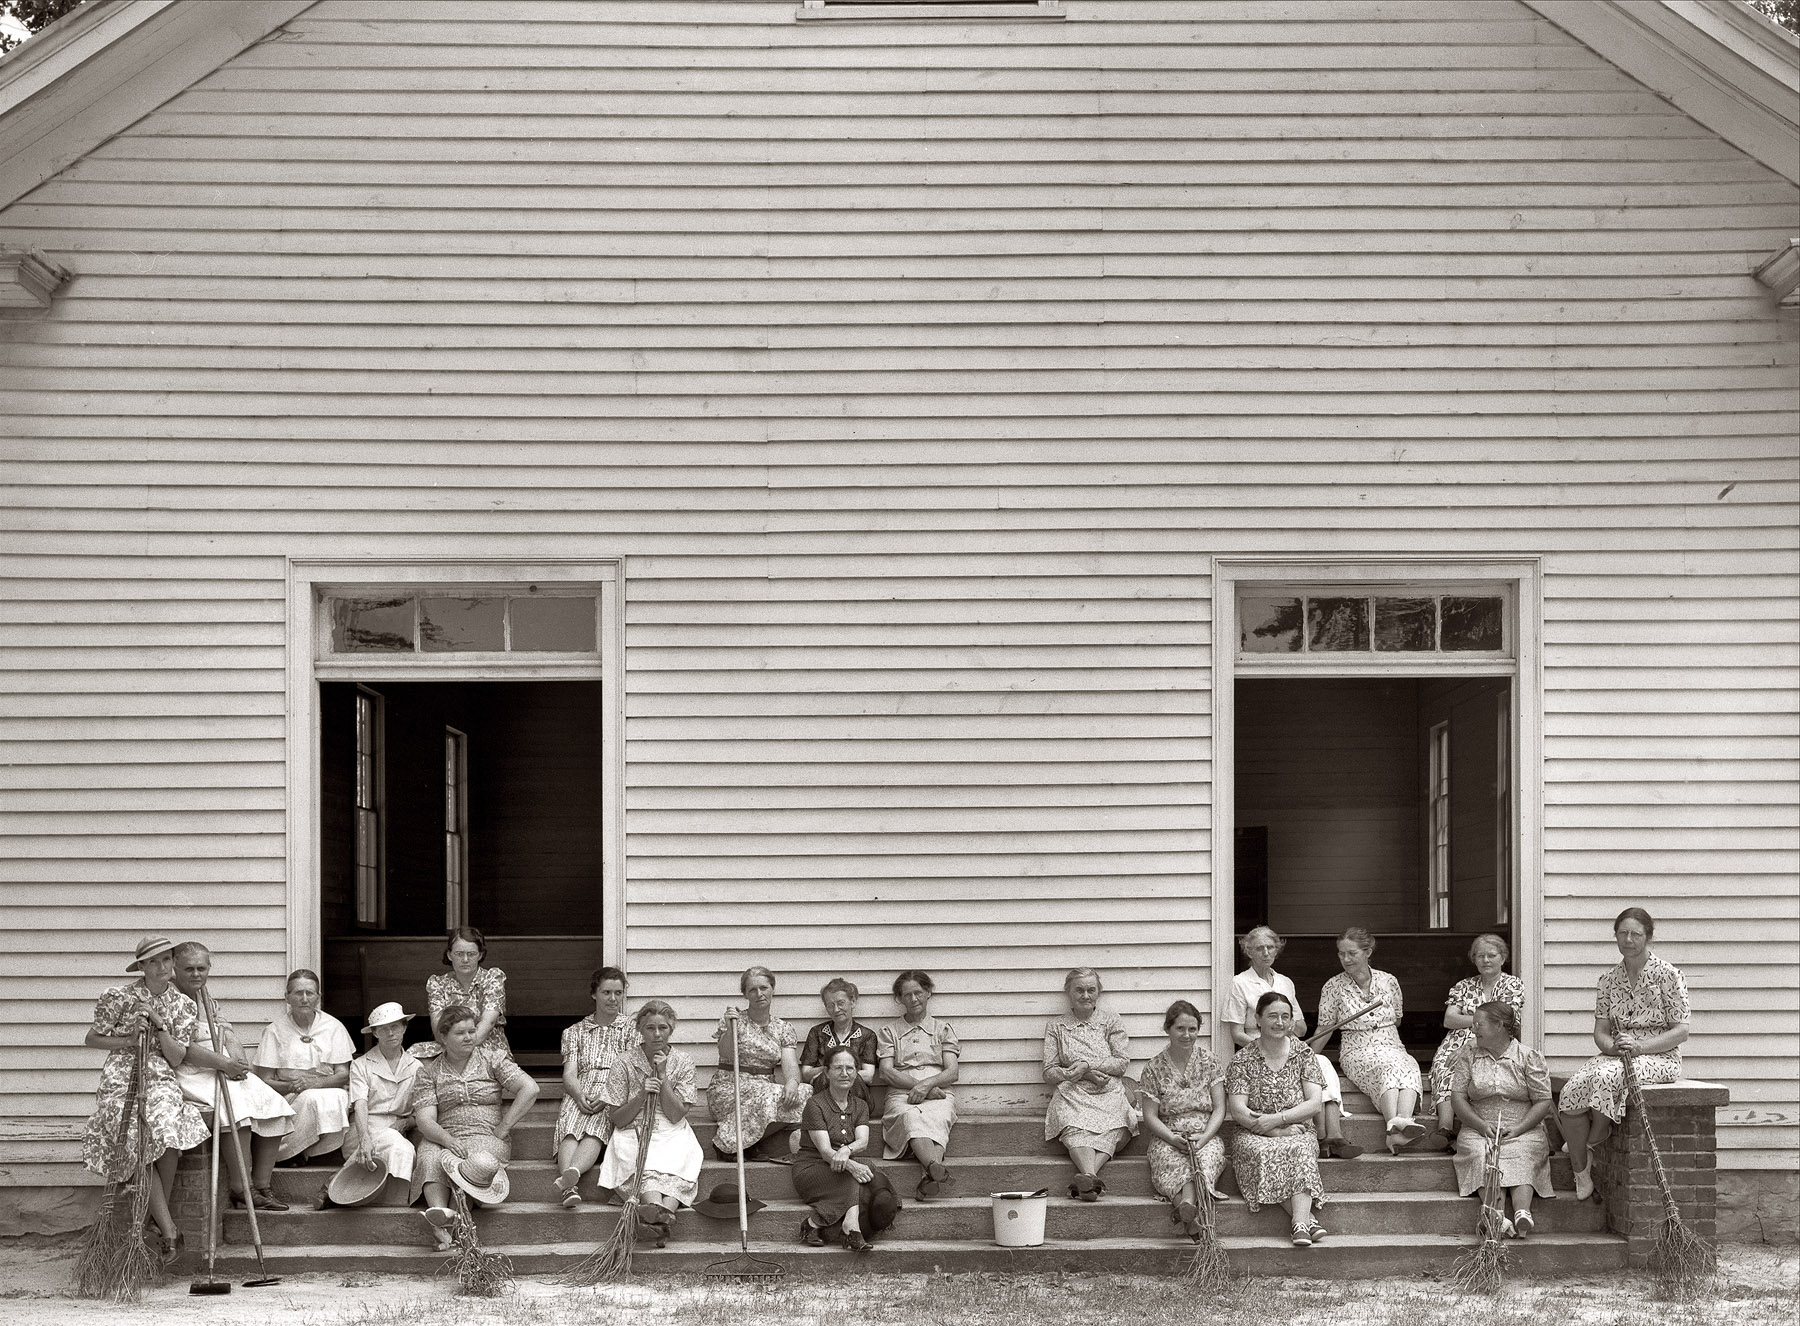 July 1939. Women of the congregation of Wheeler's Church on steps with brooms and buckets on annual clean up day. Gordonton, North Carolina. View full size.